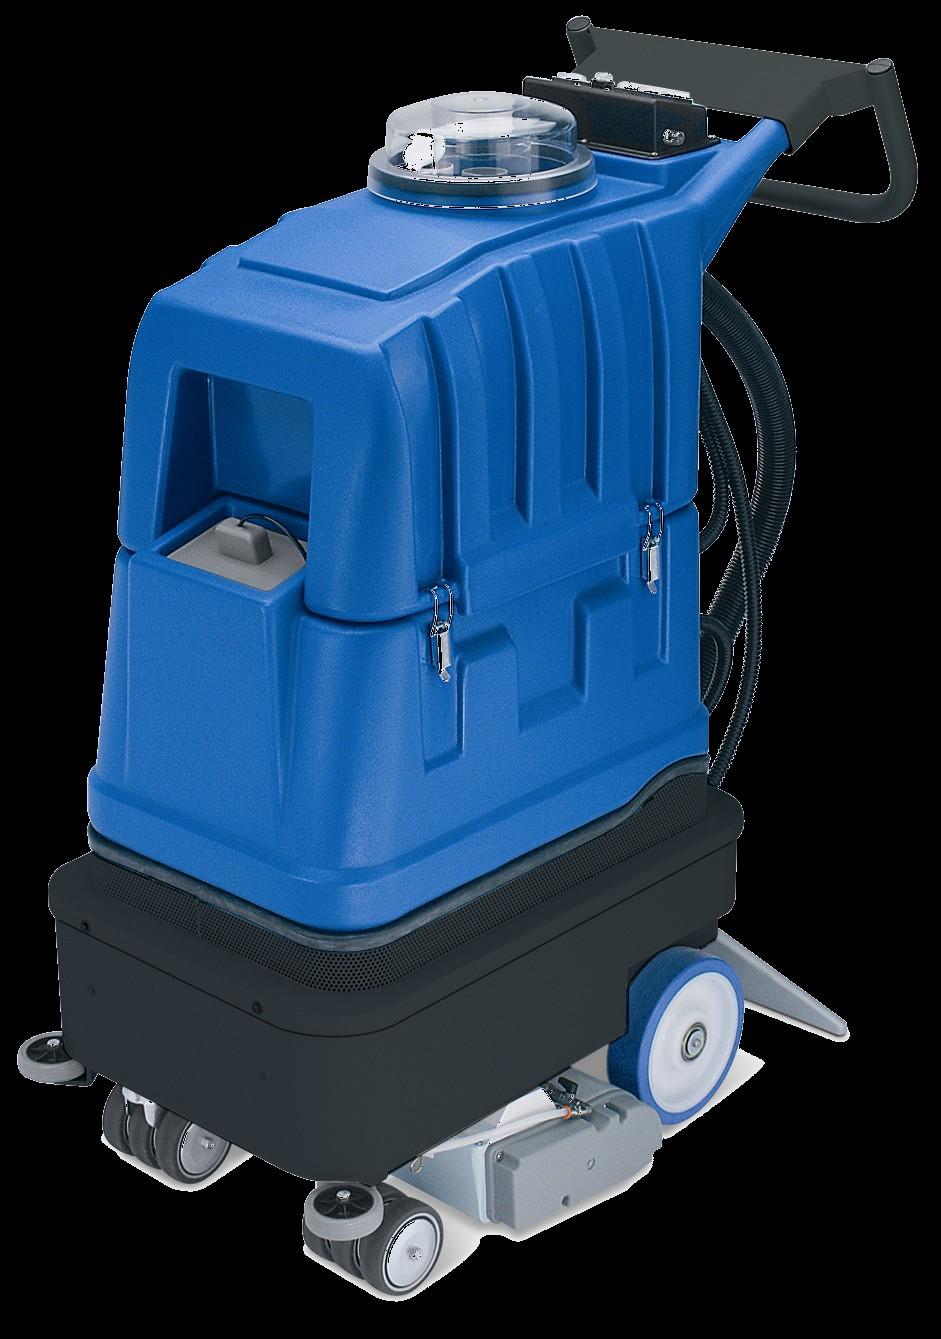 Self-Contained machines The Powerful is a self-propelled machine designed to clean very large areas of carpeting.